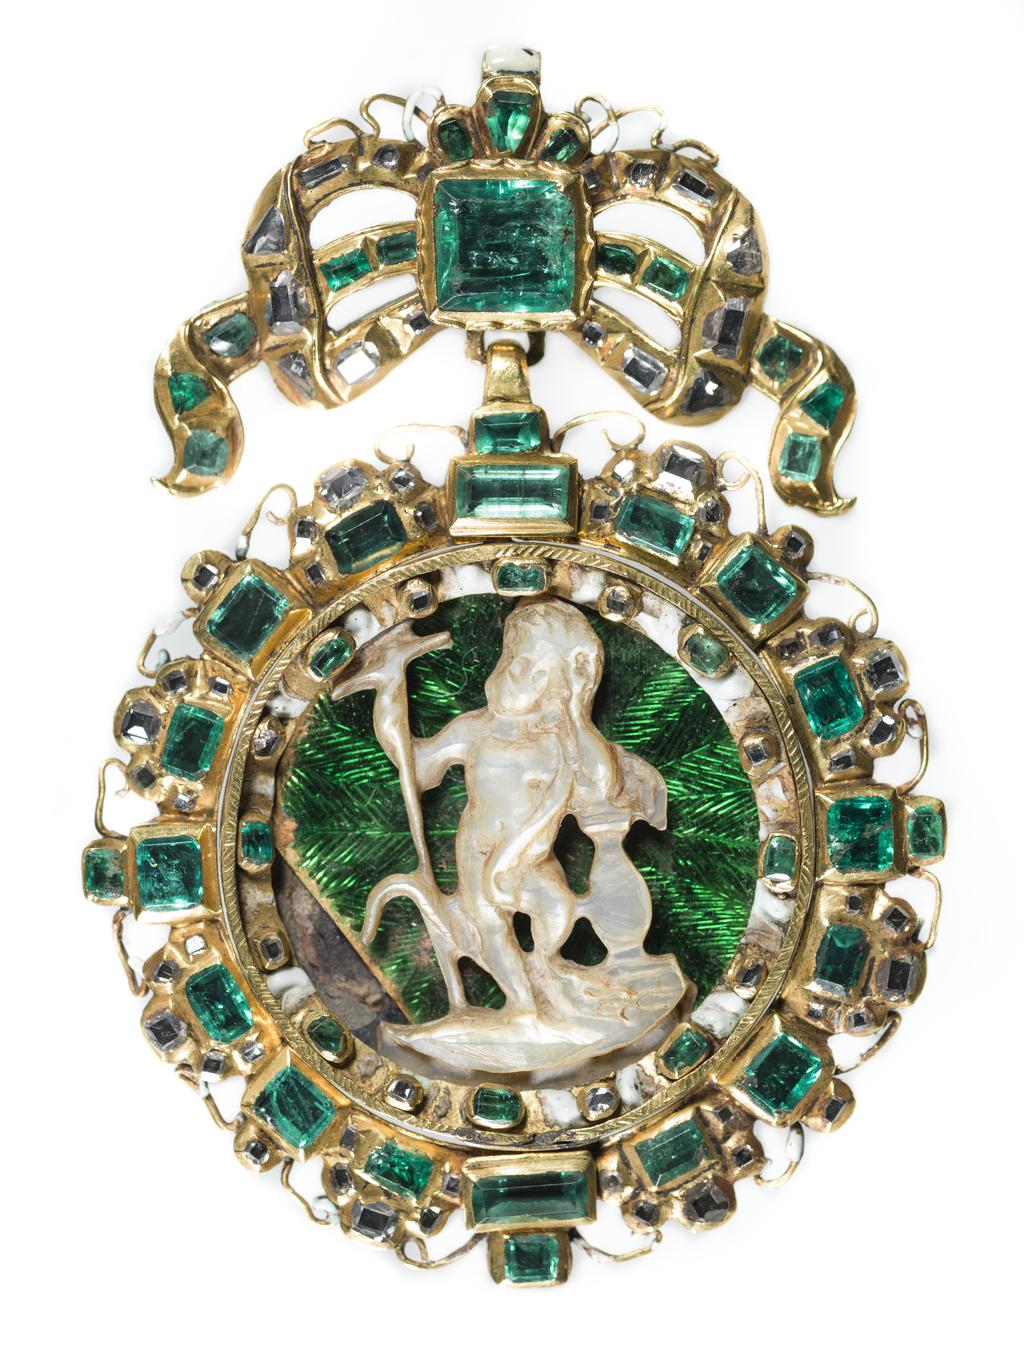 An image of Pendant/Jewellery. Gold, set with emeralds and two diamonds and a carved mother-of-pearl figure of Christ on a background of gold, engraved and enamelled in translucent green (basse-taille enamelling). The back enamelled in opaque white, pink and black and set with an enamelled plaque in blue pink and grey-black of the virgin and child. Circular with a bow at the top. Gold, basse taille enamelling, emerald decoration, mother-of-pearl carving, height, whole, 7.8 cm, width, whole, 5.4 cm, circa 1600- 1700. Spanish.